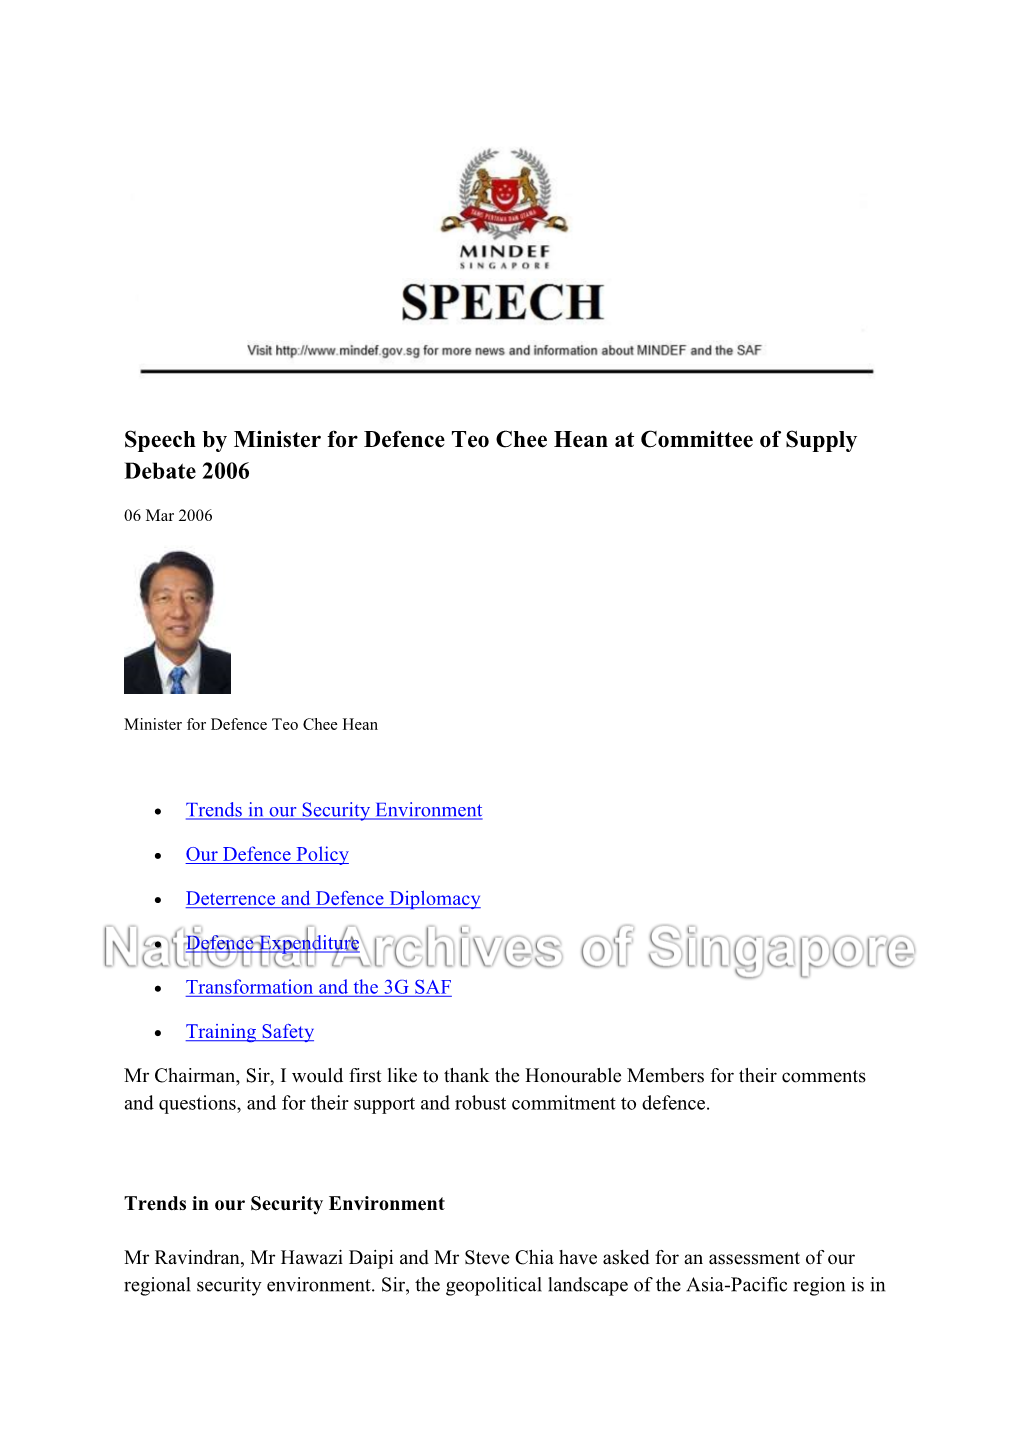 Speech by Minister for Defence Teo Chee Hean at Committee of Supply Debate 2006